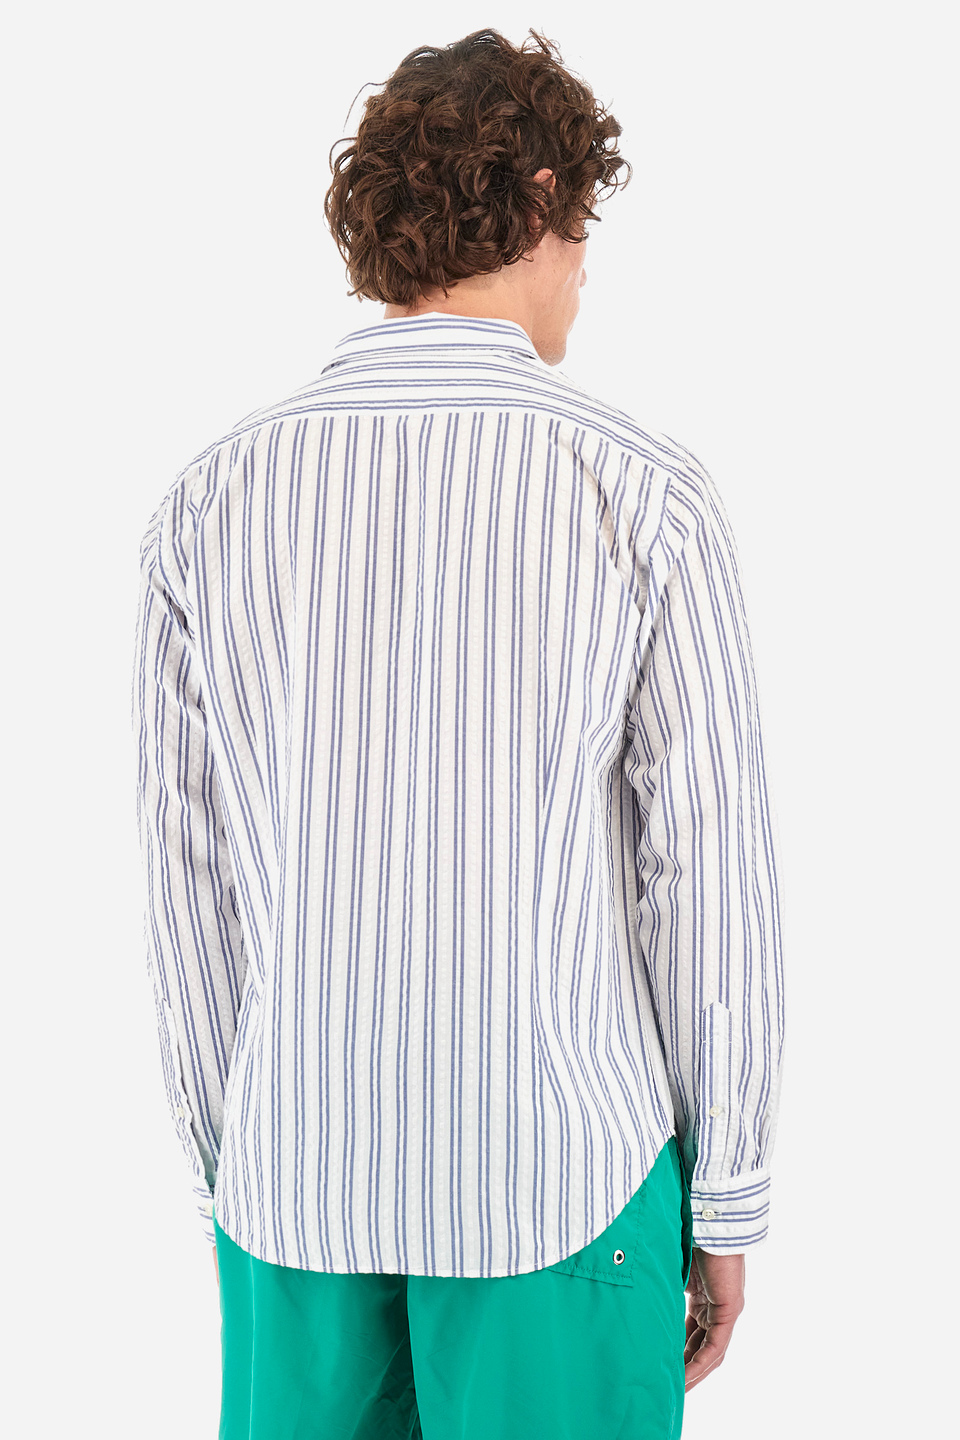 Cotton shirt with a striped patterned - Innocent | La Martina - Official Online Shop